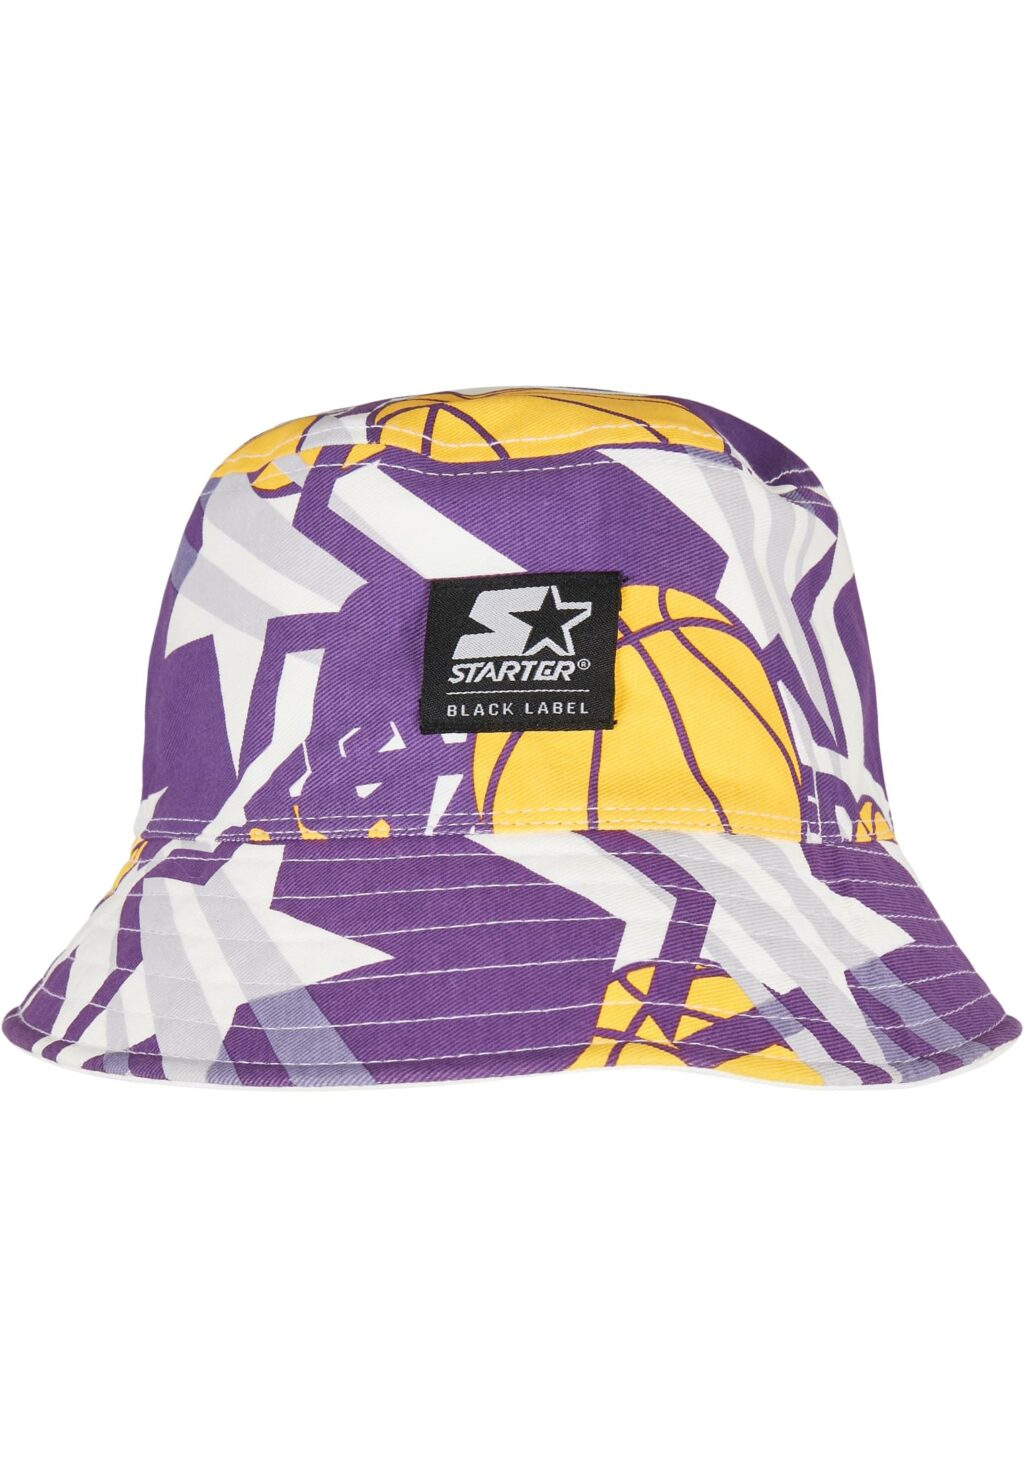 Reversible Airball Bucket Hat white one ST254